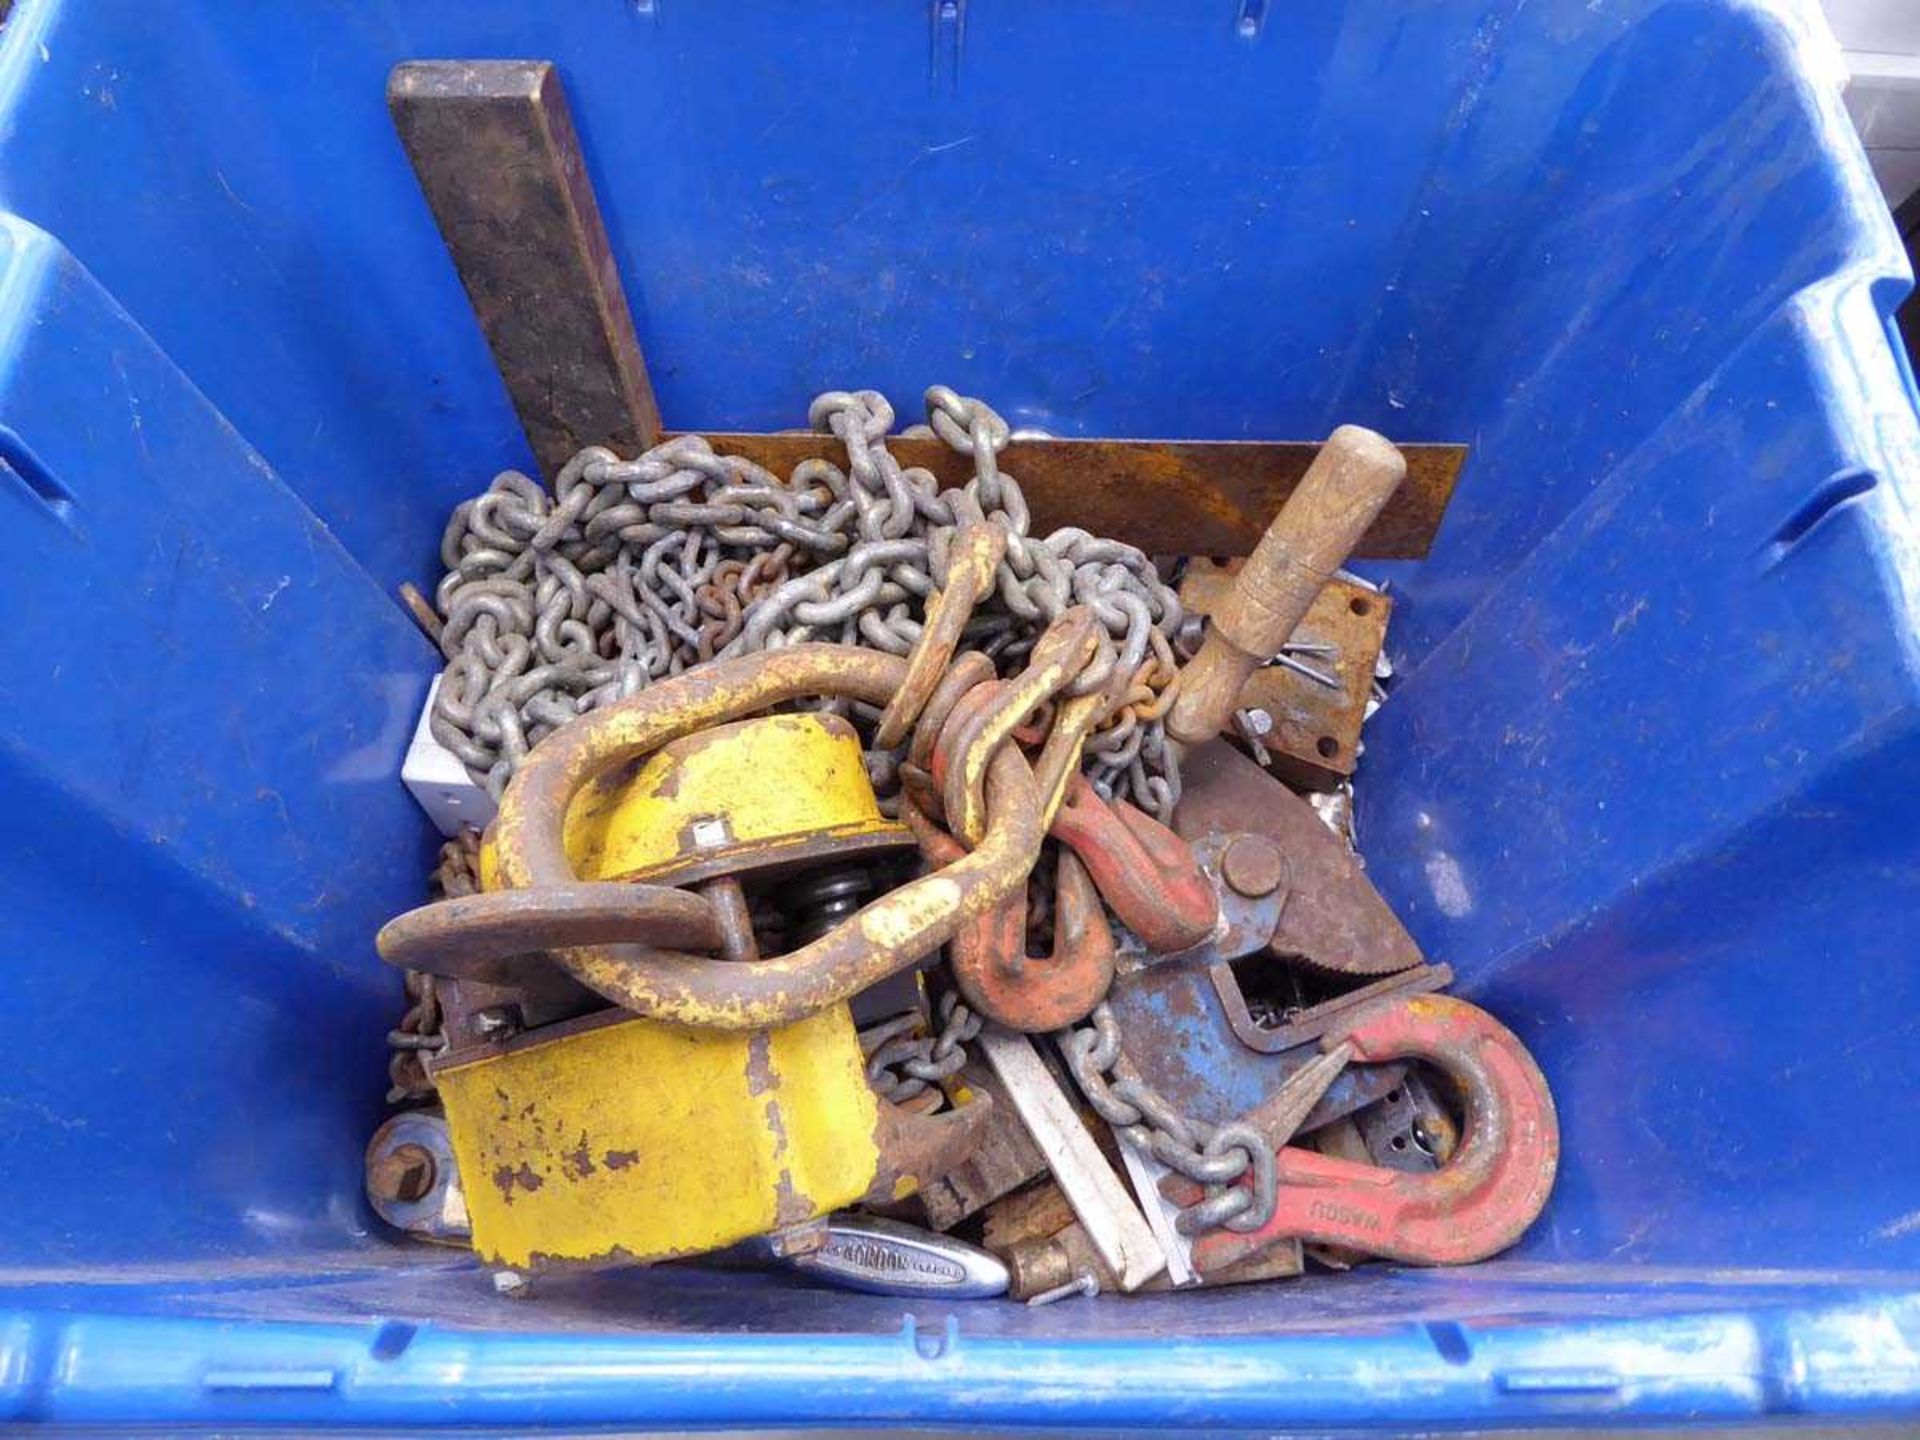 Box containing chain hoist, nails, small tools and box of saw blades